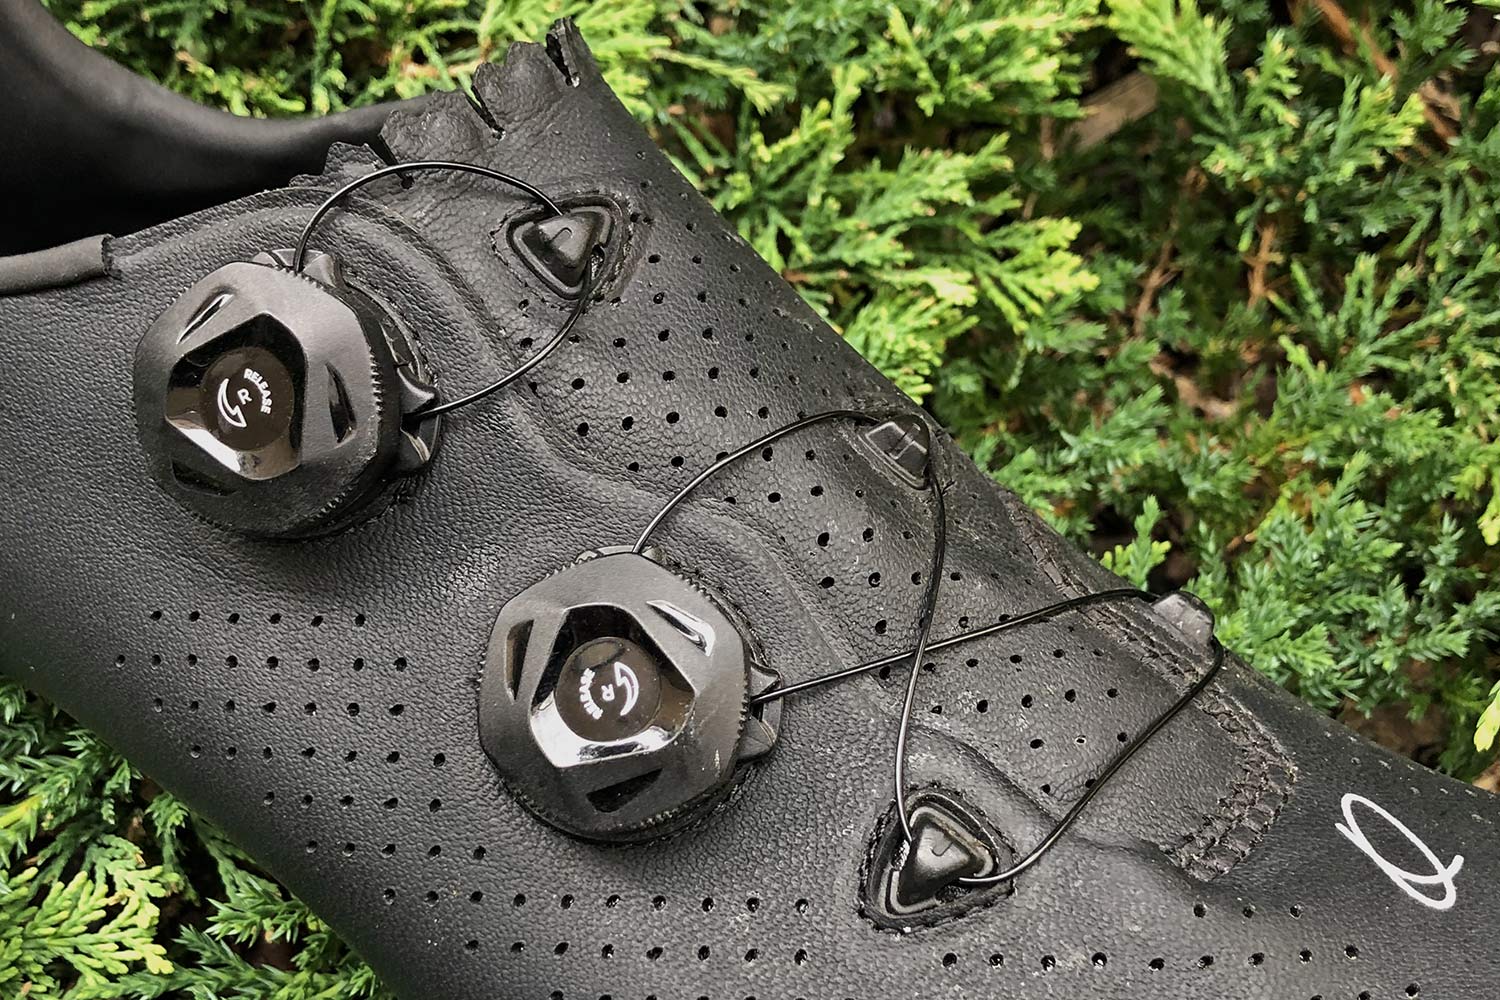 Quoc Mono II lightweight carbon-soled road cycling shoes Review, dial retention